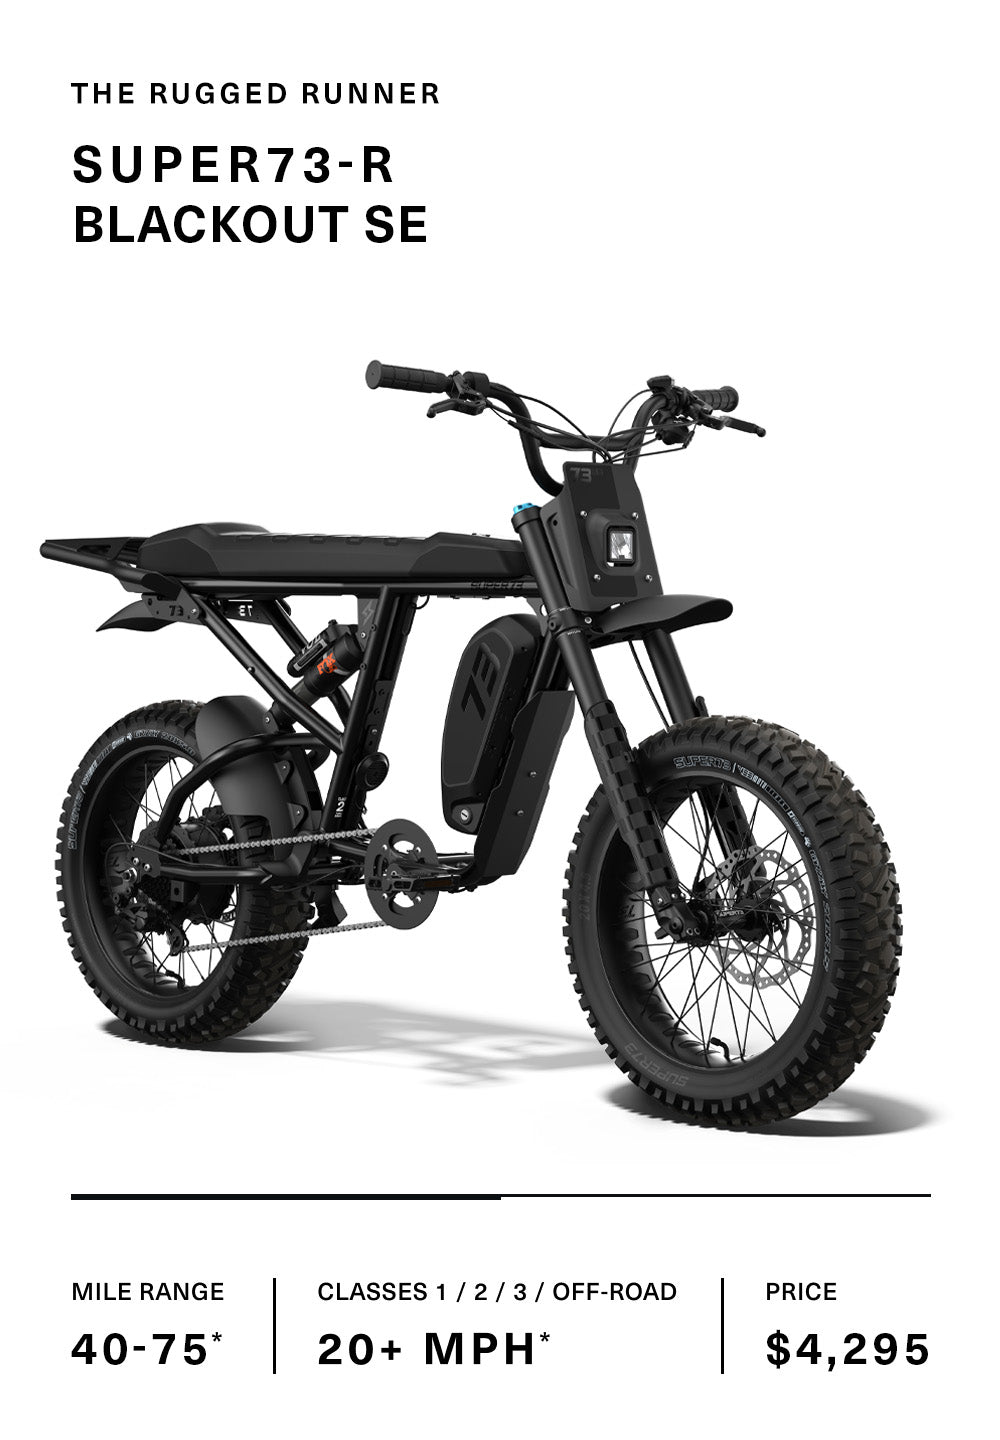 Image of the SUPER73-R Blackout SE bike with specs.